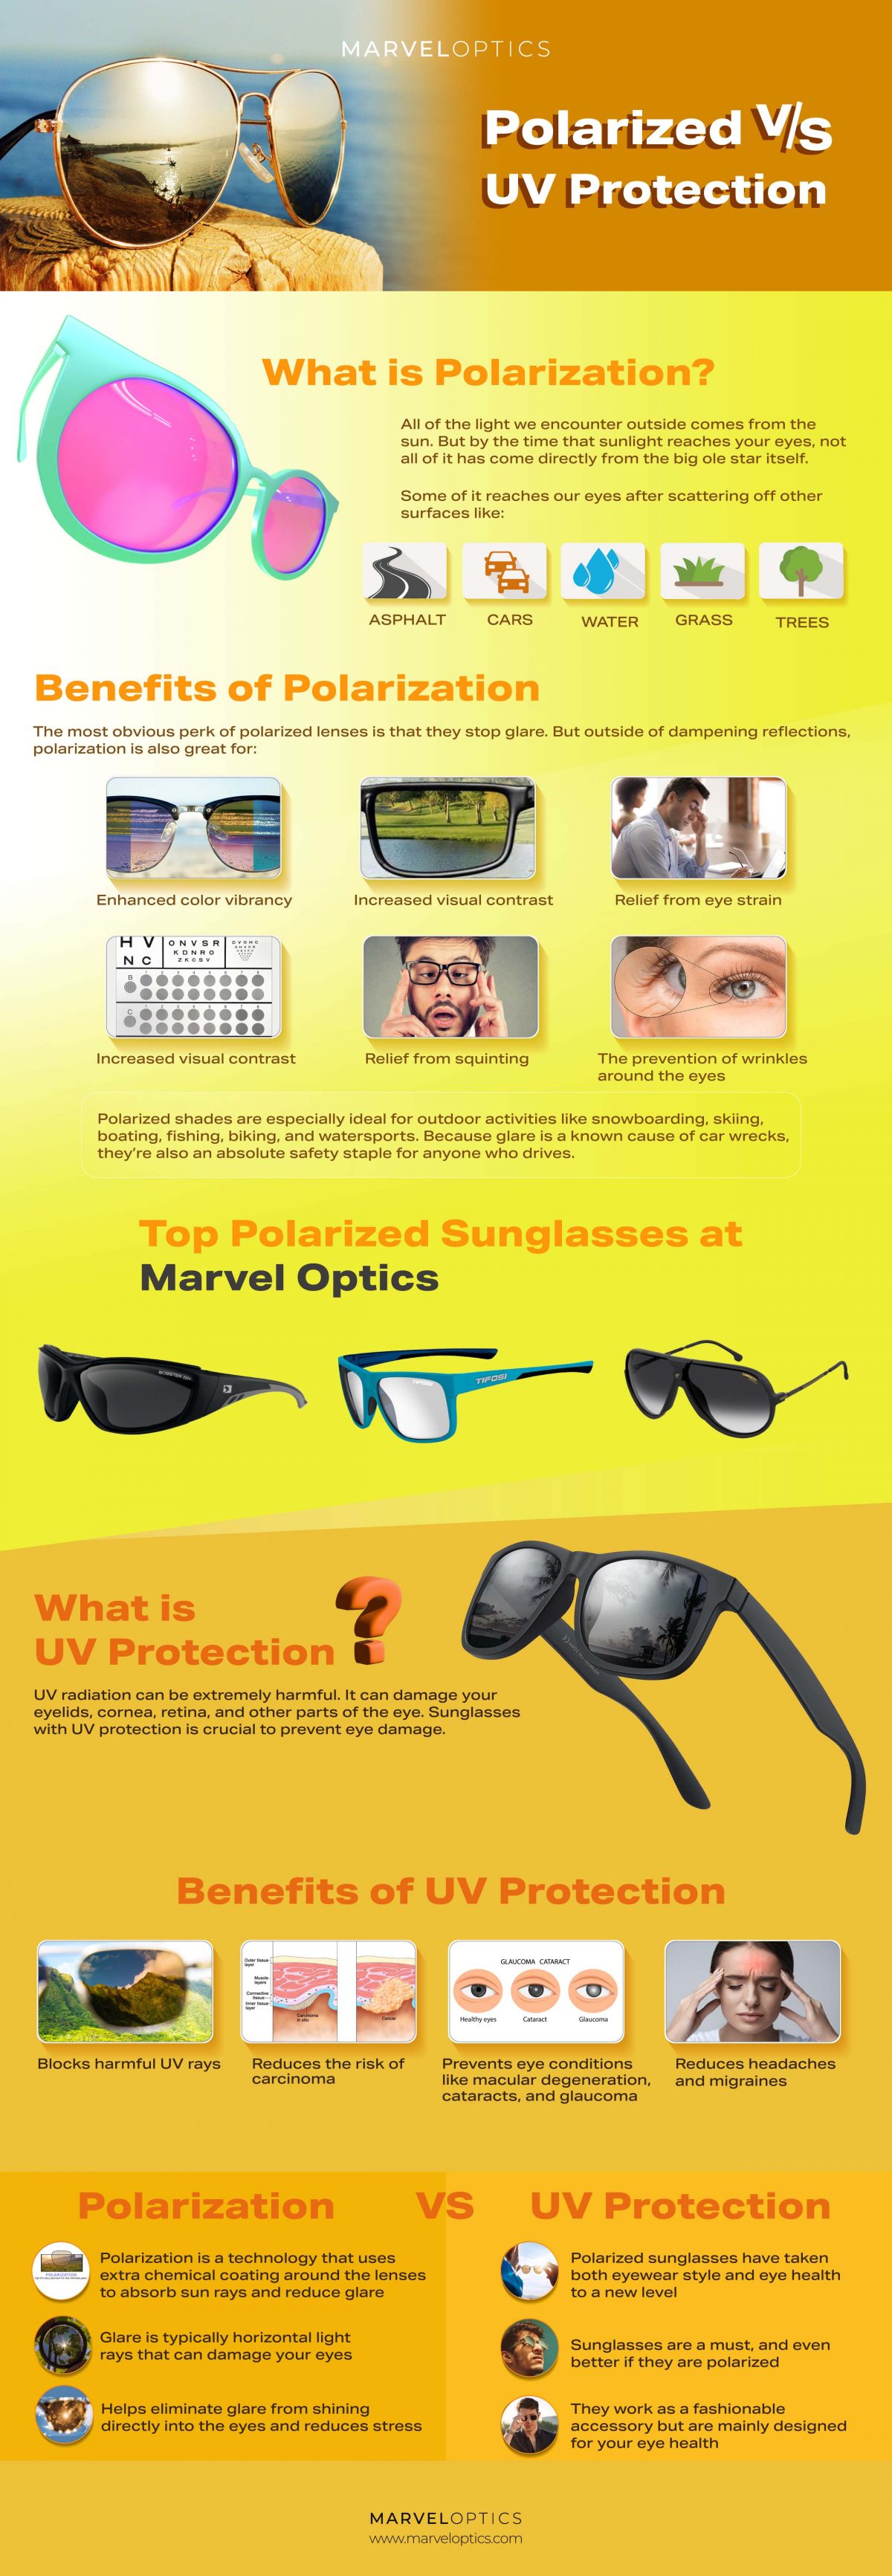 How to Tell if Sunglasses Have UV Protection